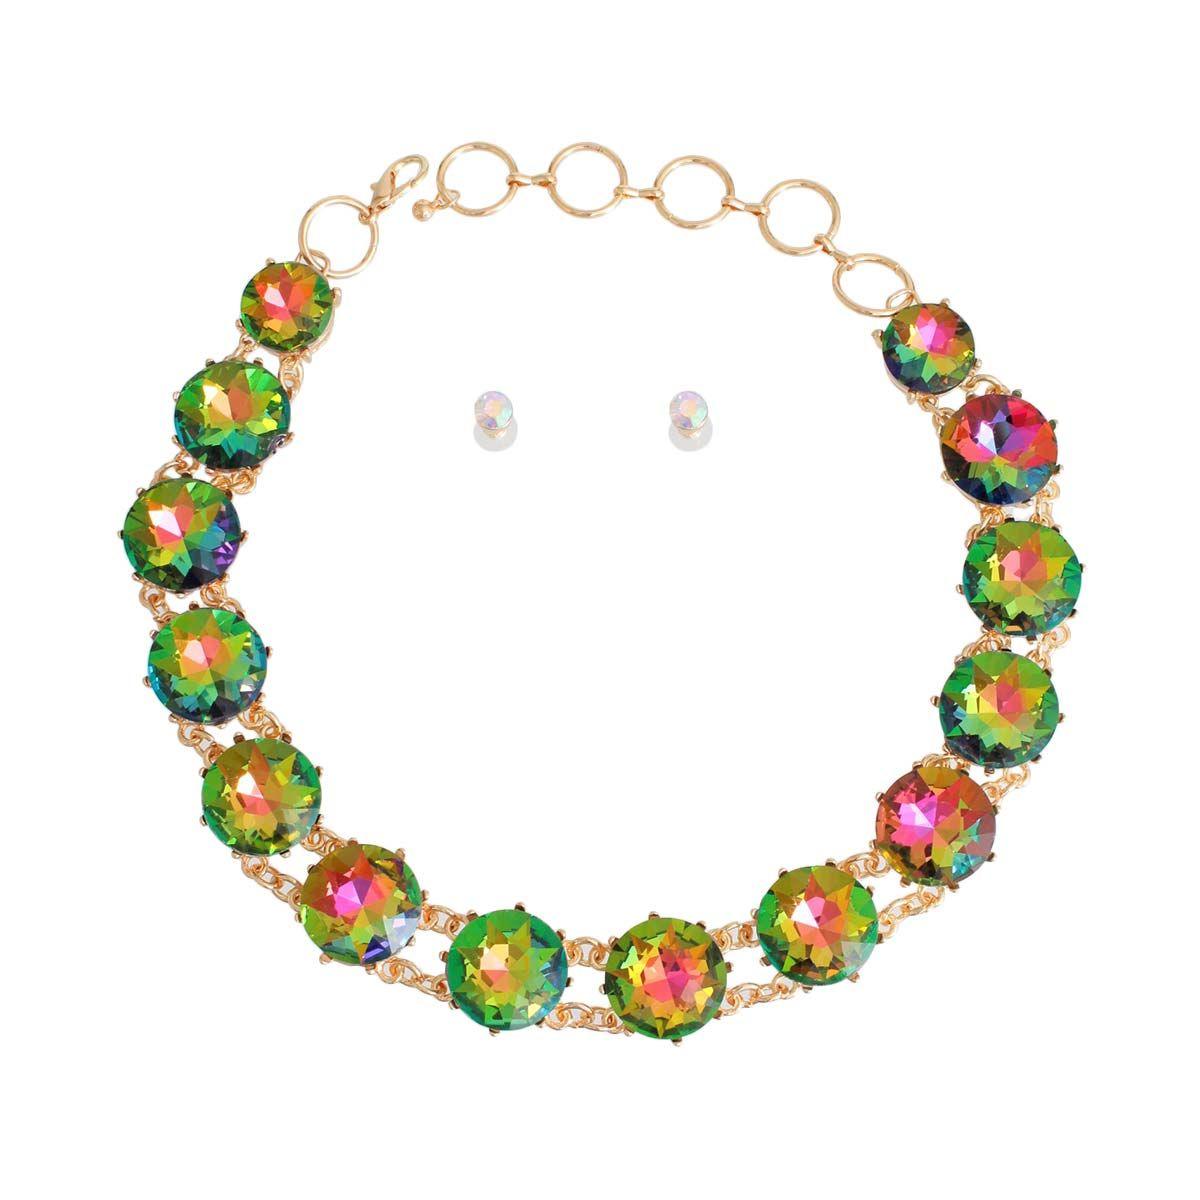 Shop the Perfect Pink-Green Necklace & Earring Set Today!